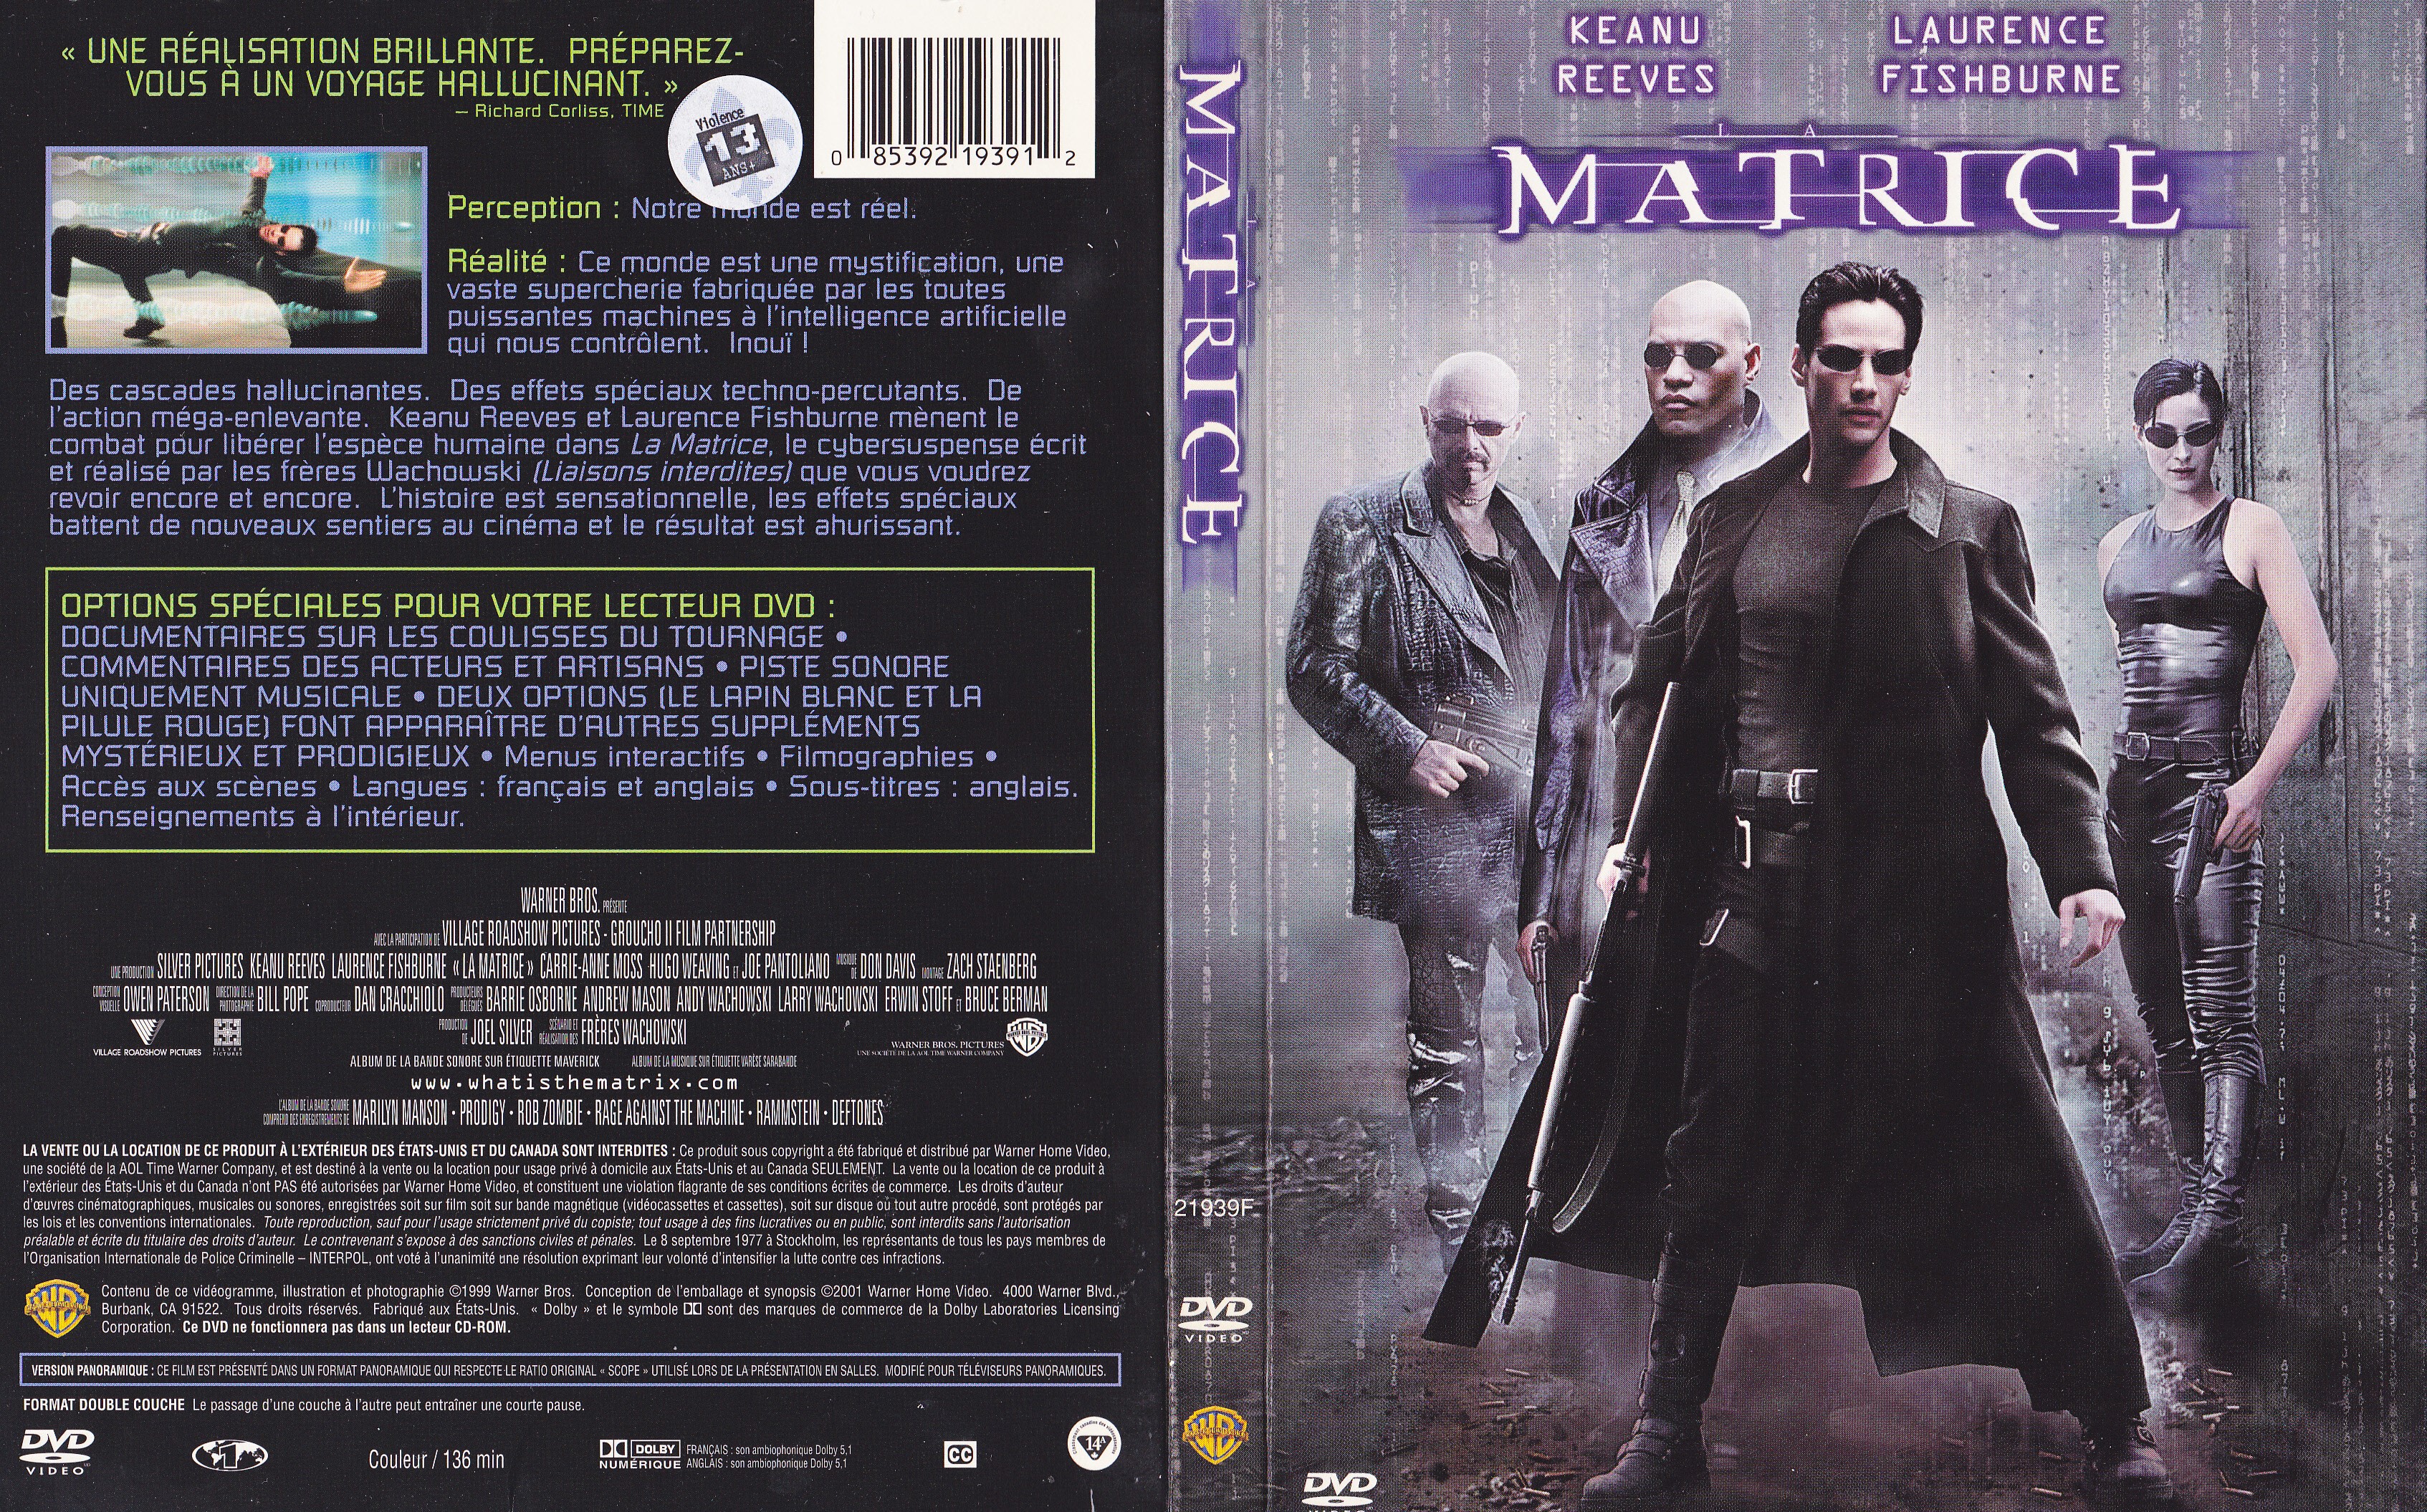 Jaquette DVD Matrice (Canadienne)